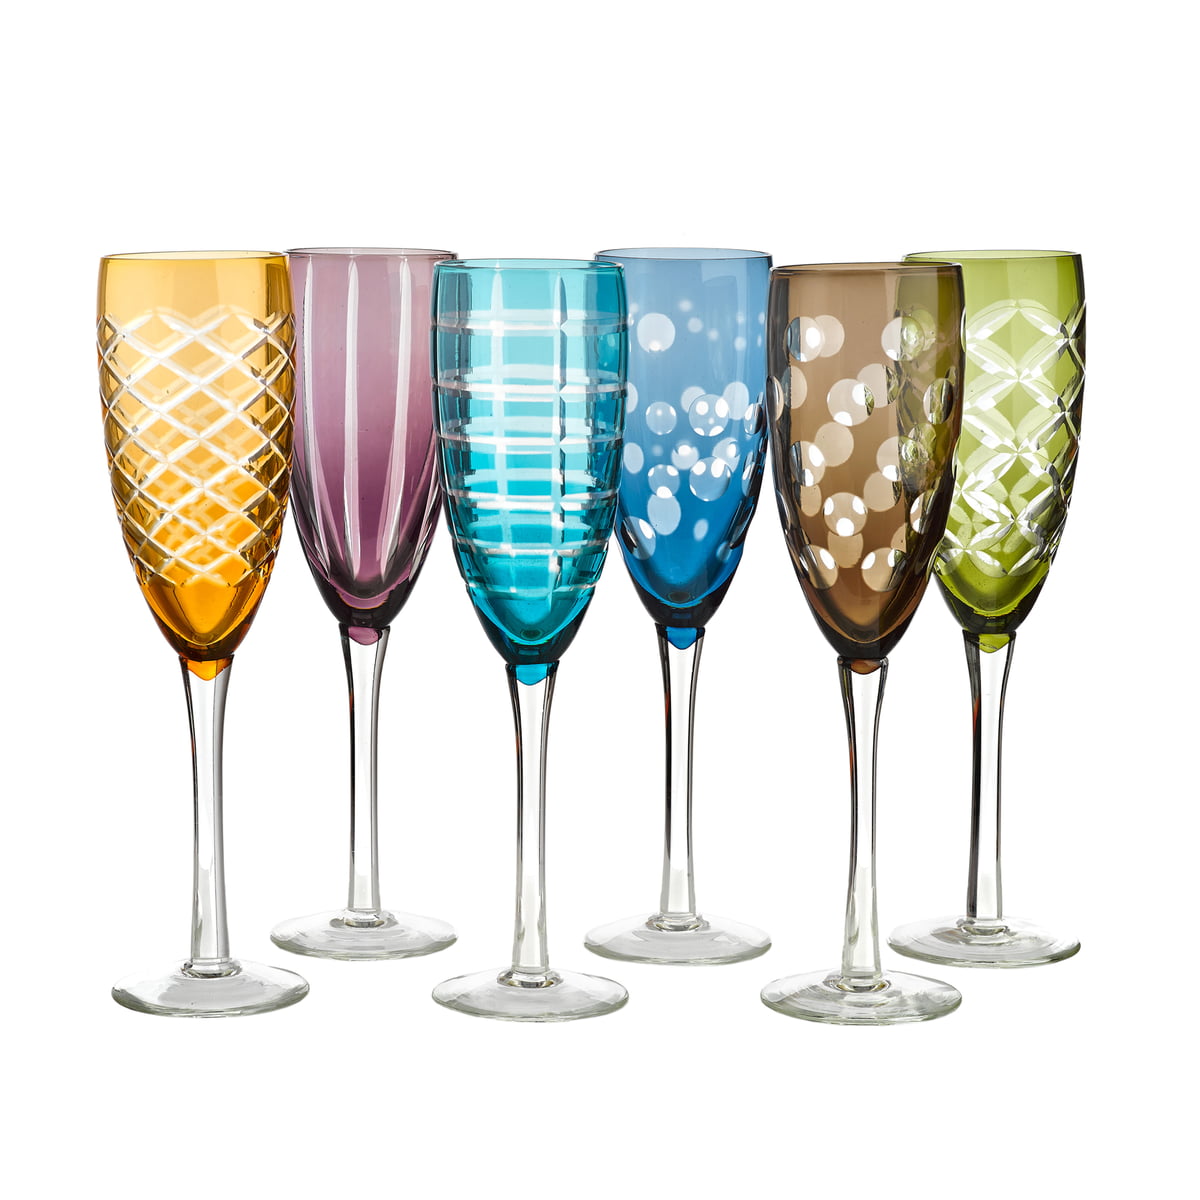 Pols Potten - Mixed Cuttings Champagne Glass - Set of 6